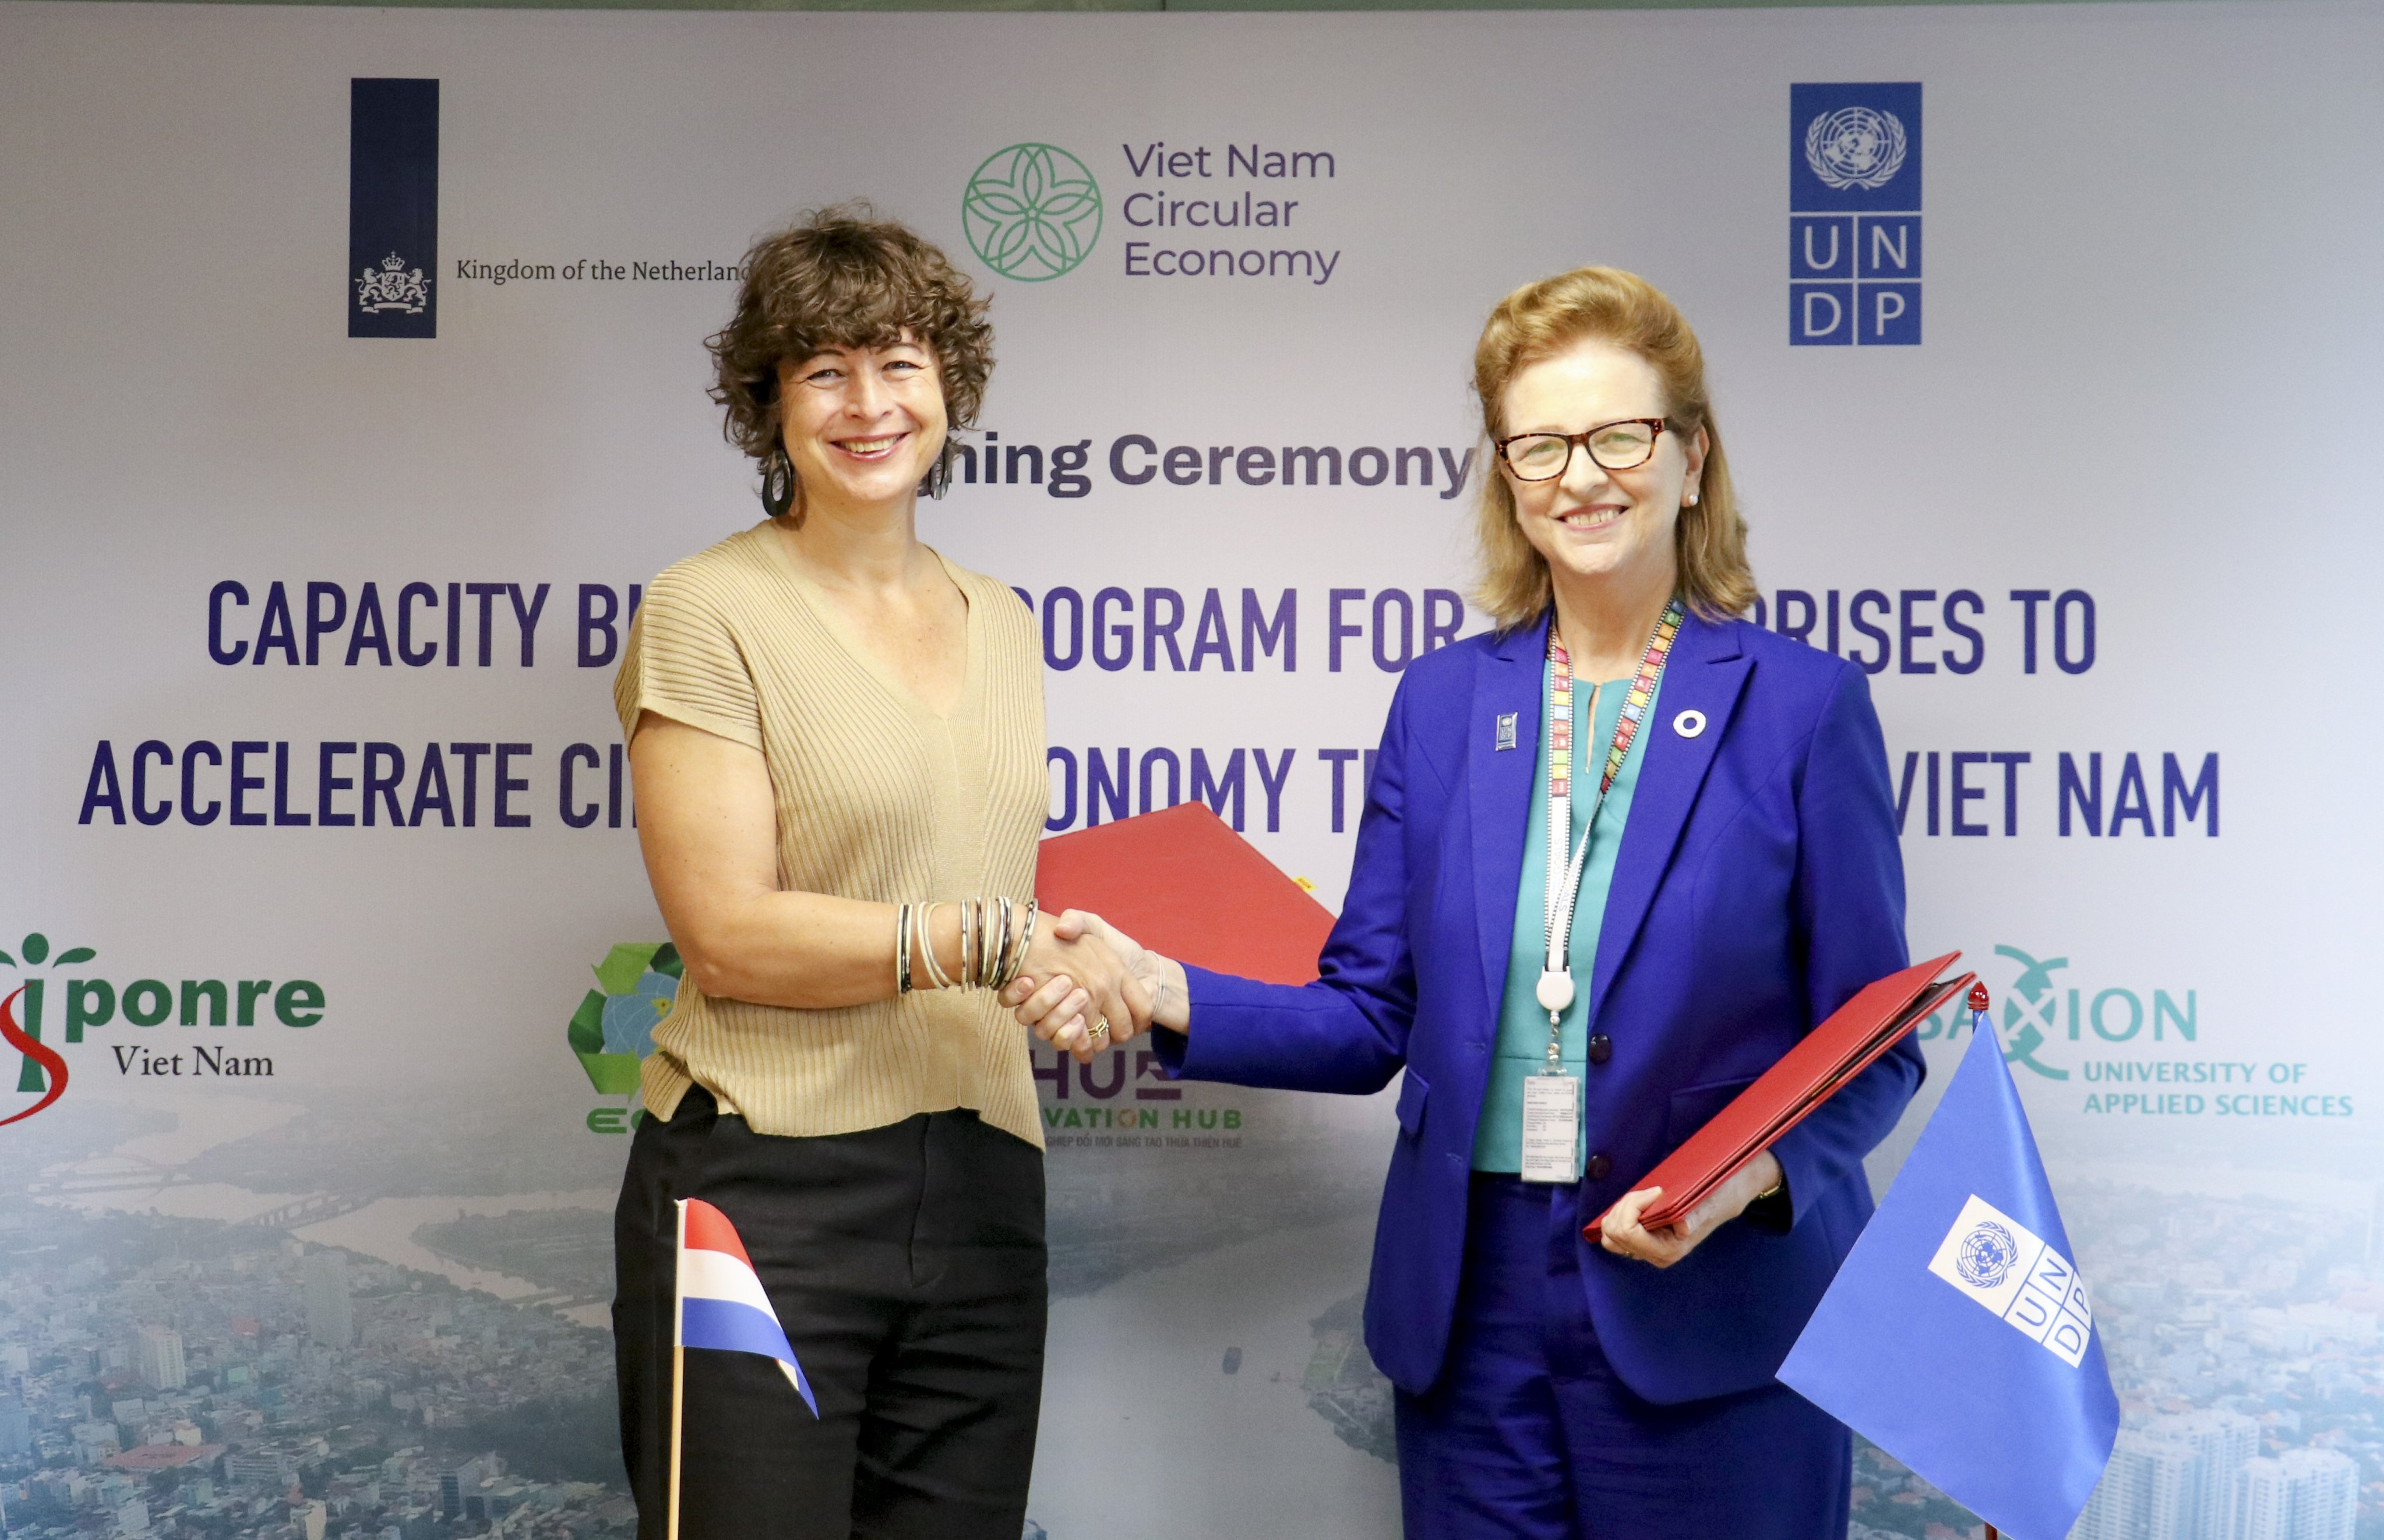  Ambassador of the Kingdom of the Netherlands to Vietnam Elsbeth Akkerman (left) and UNDP Resident Representative in Vietnam Caitlin Wiesen signed an agreement to execute a capacity-building program for Vietnamese firms in the field of the circular economy.